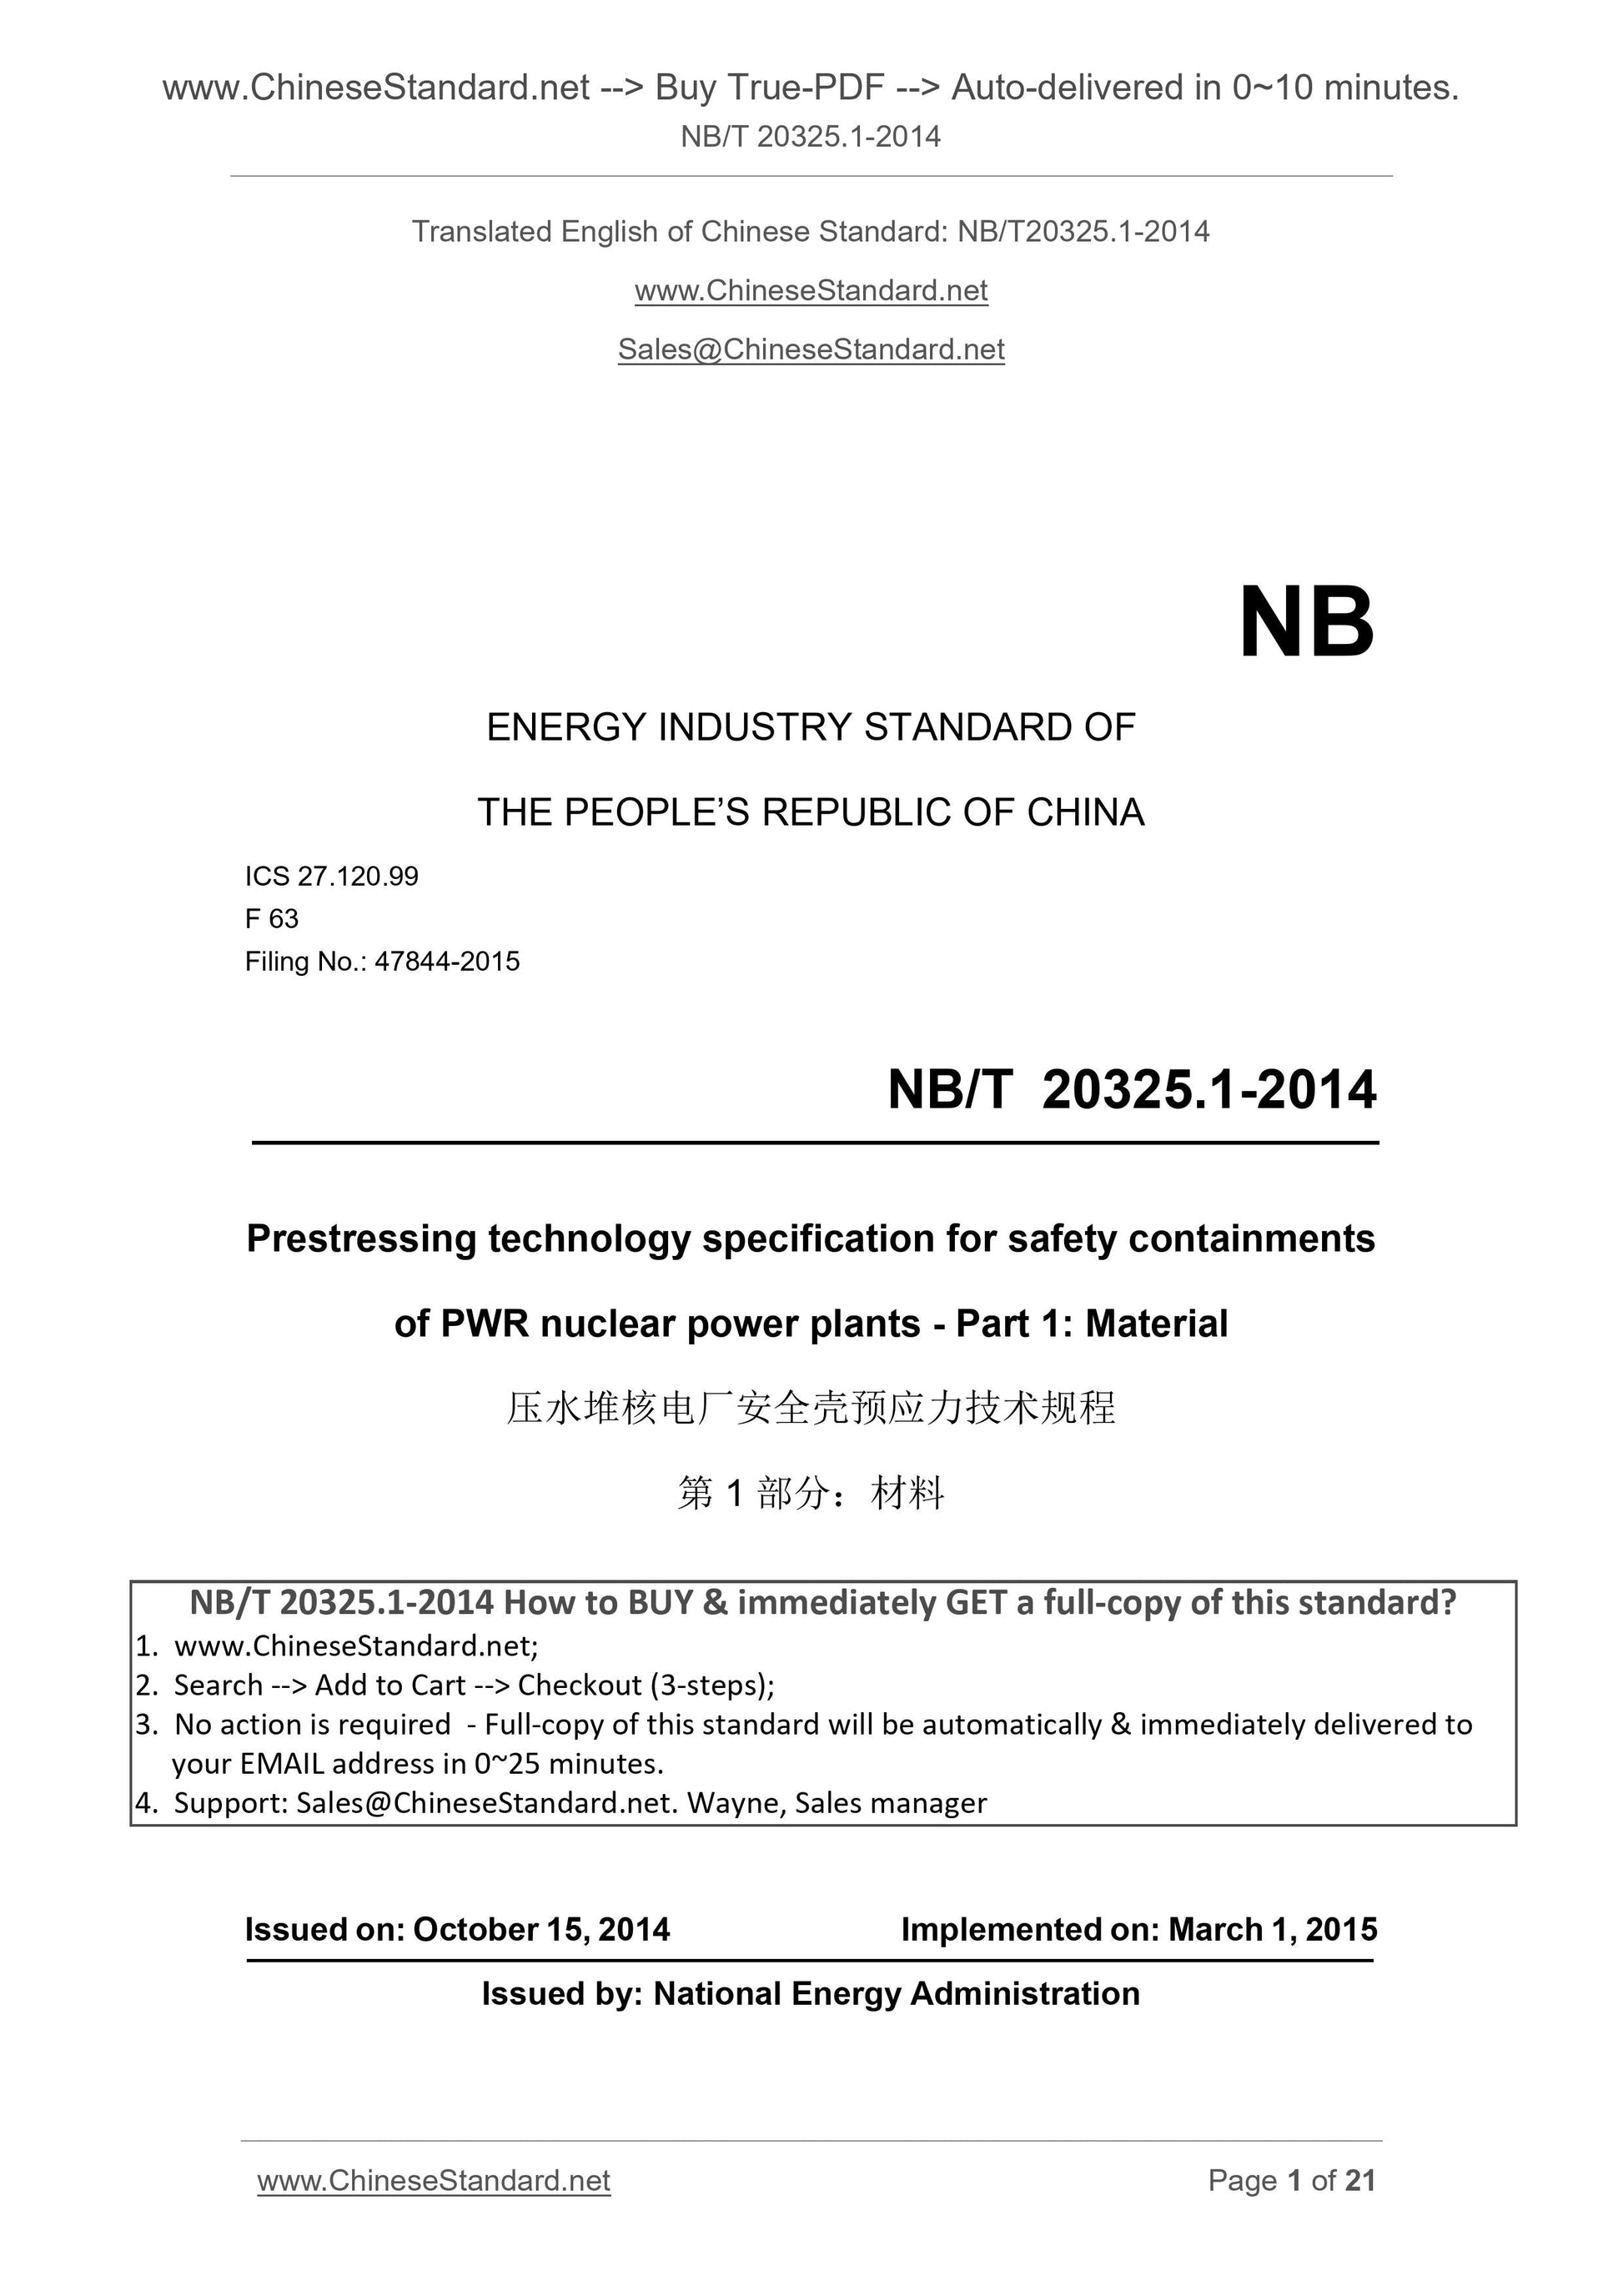 NB/T 20325.1-2014 Page 1